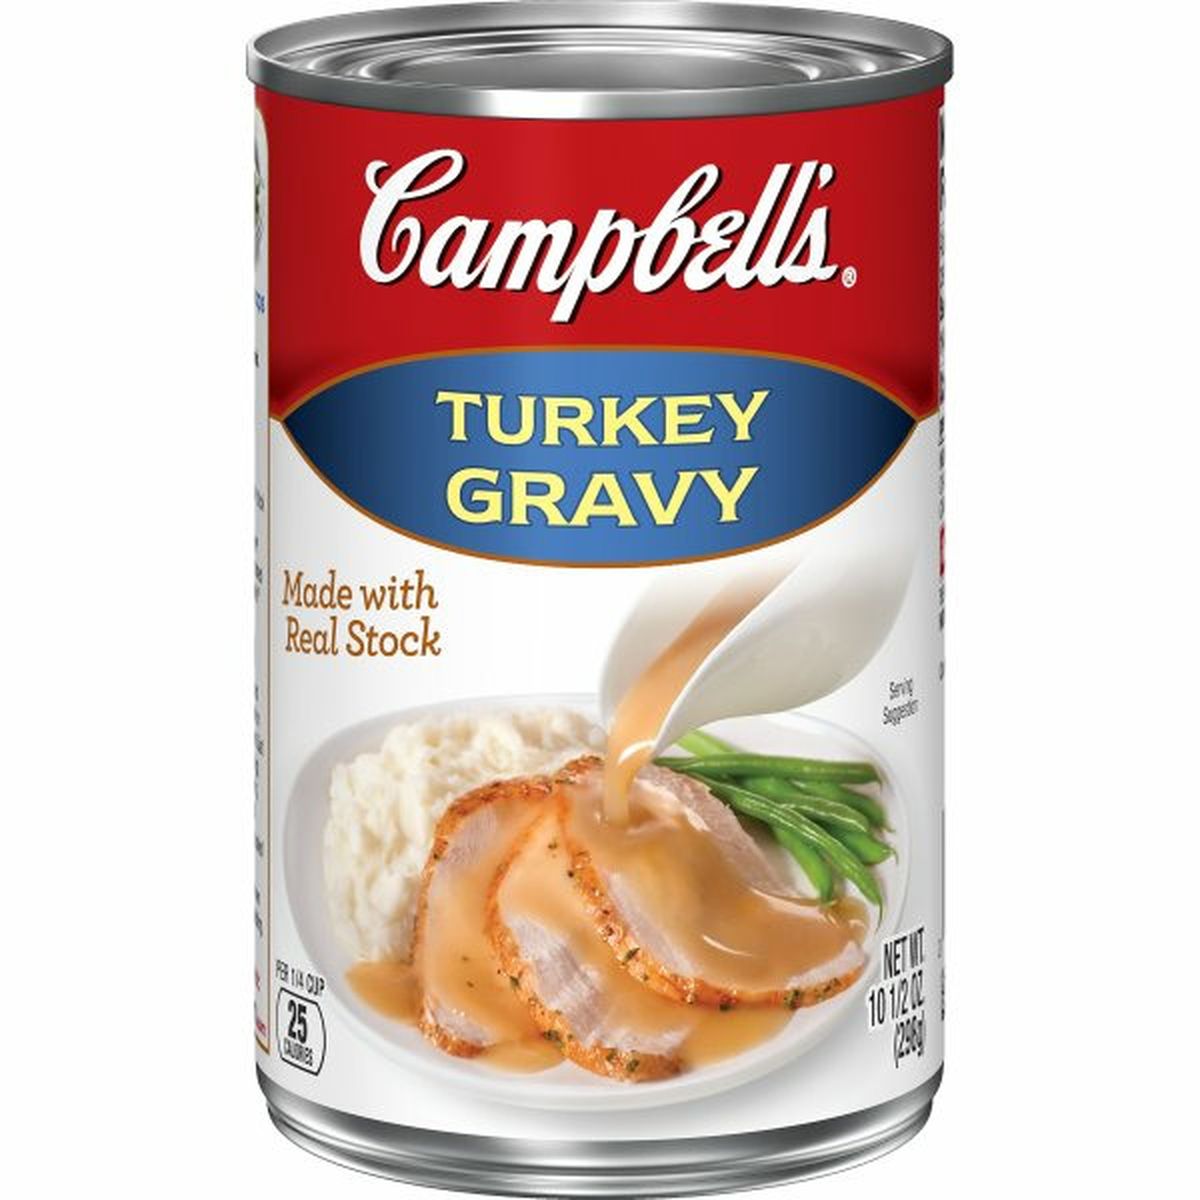 Calories in Campbell'ss Turkey Gravy